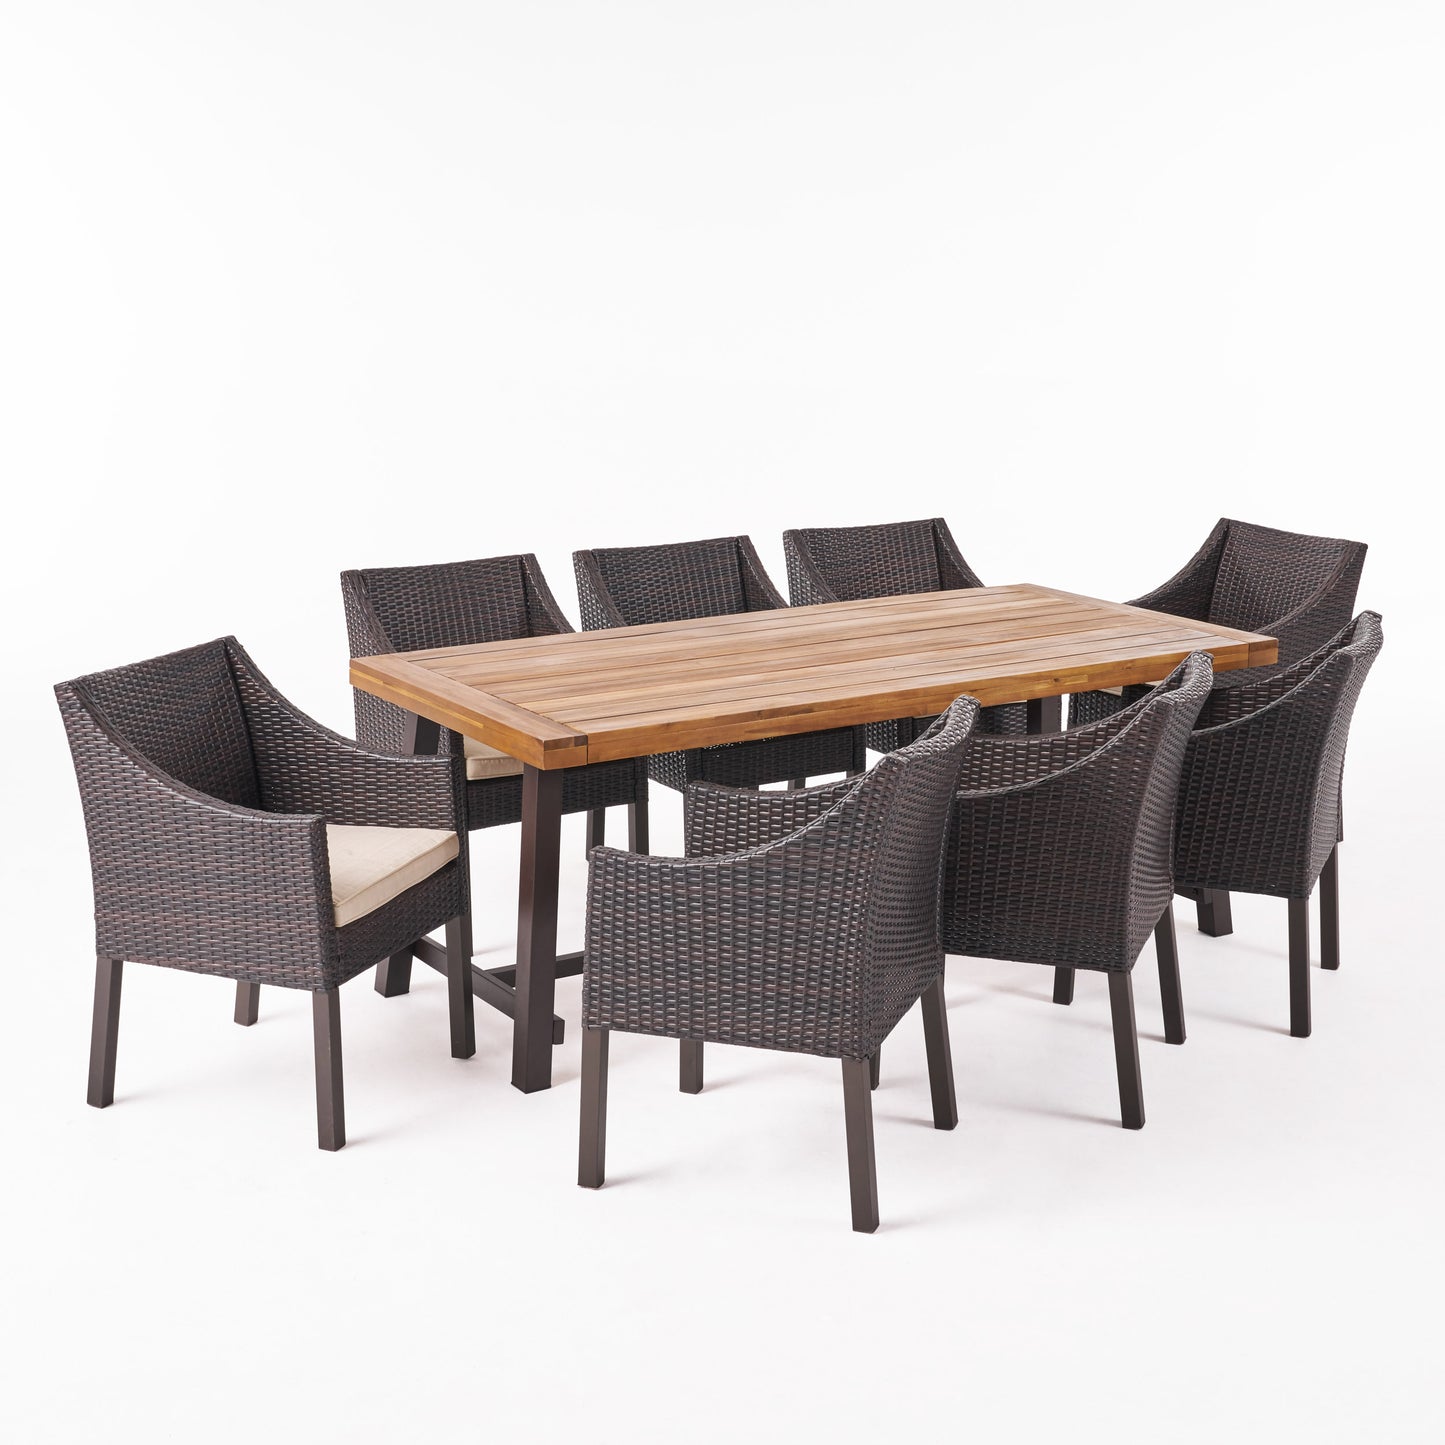 Khari Outdoor Wood and Wicker 8 Seater Dining Set